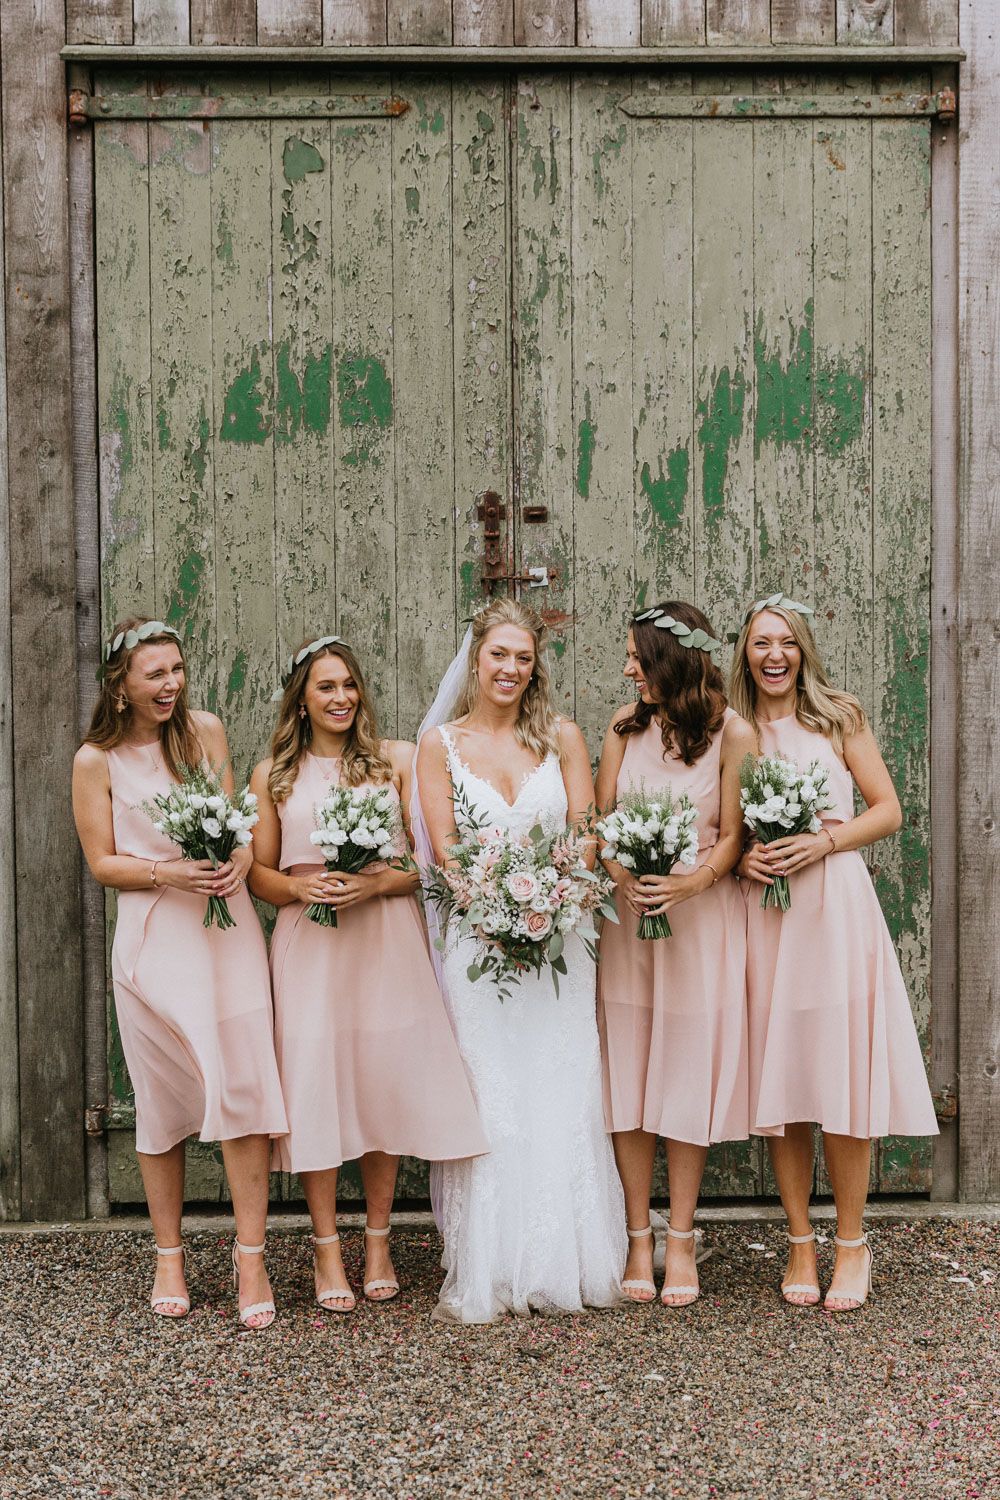 pink shades wedding color ideas with bridesmaid dresses in blush, dusty … |  Dusty rose bridesmaid dresses, Bridesmaid dresses color palette, Bridesmaid  dress colors